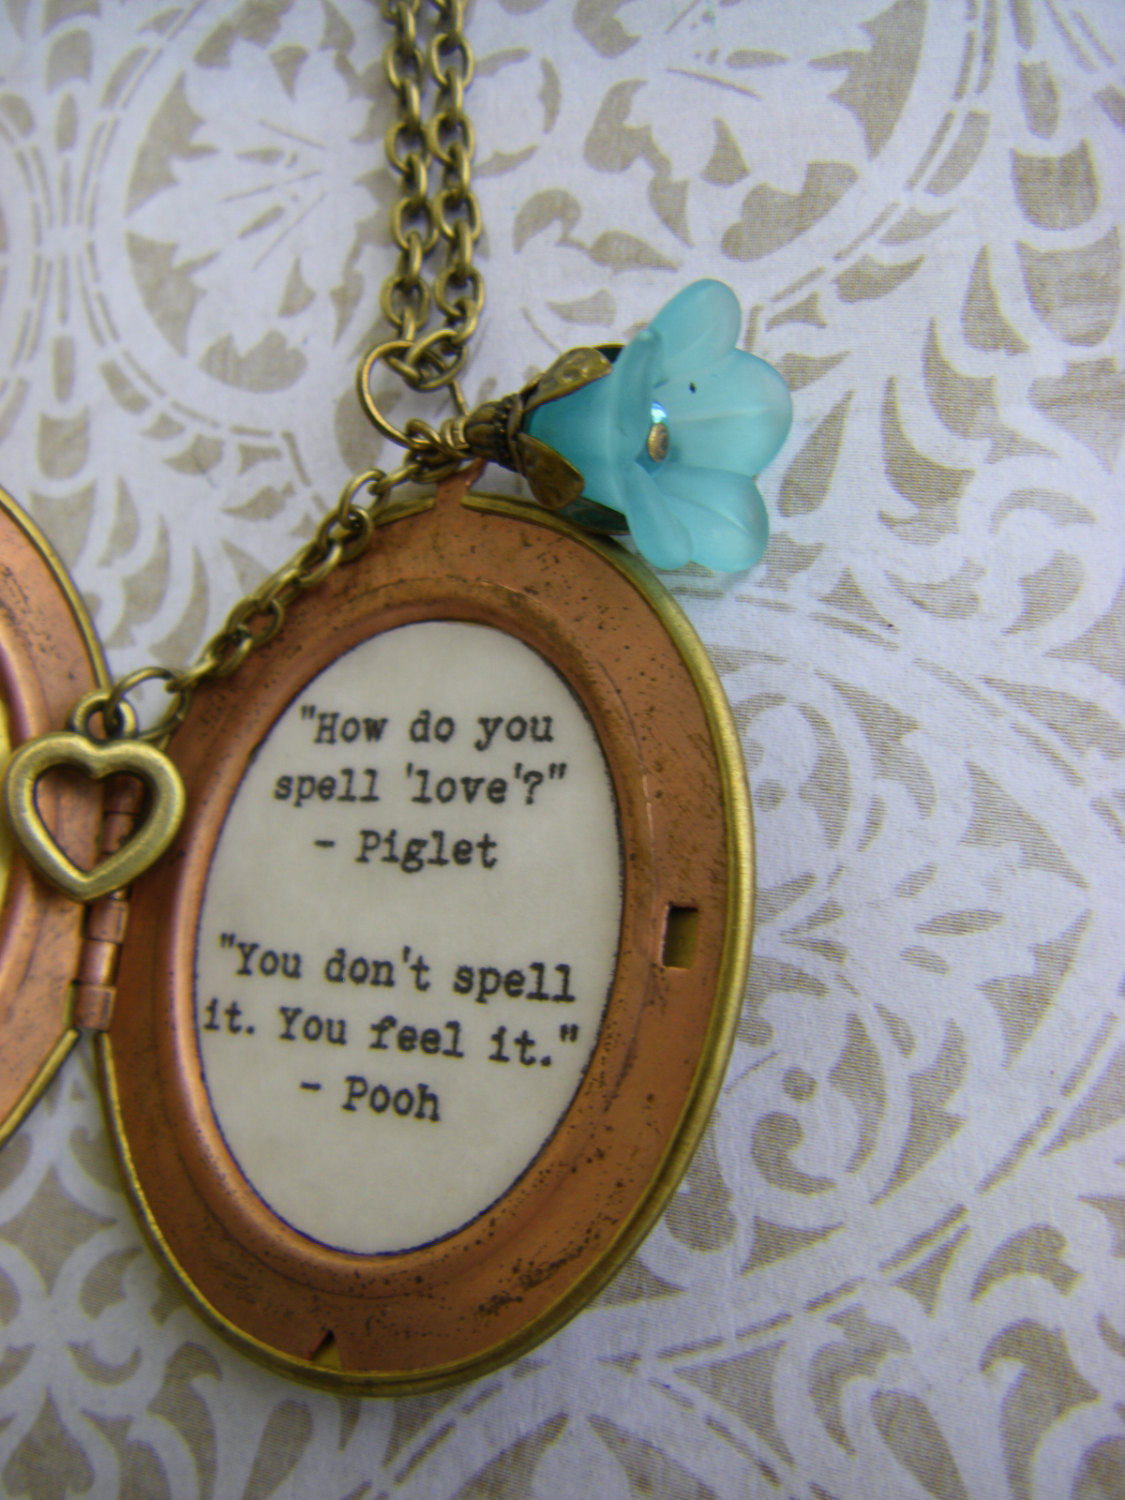 Details about   Pooh quote Friendship locket how do you spell love oval flower and key locket 